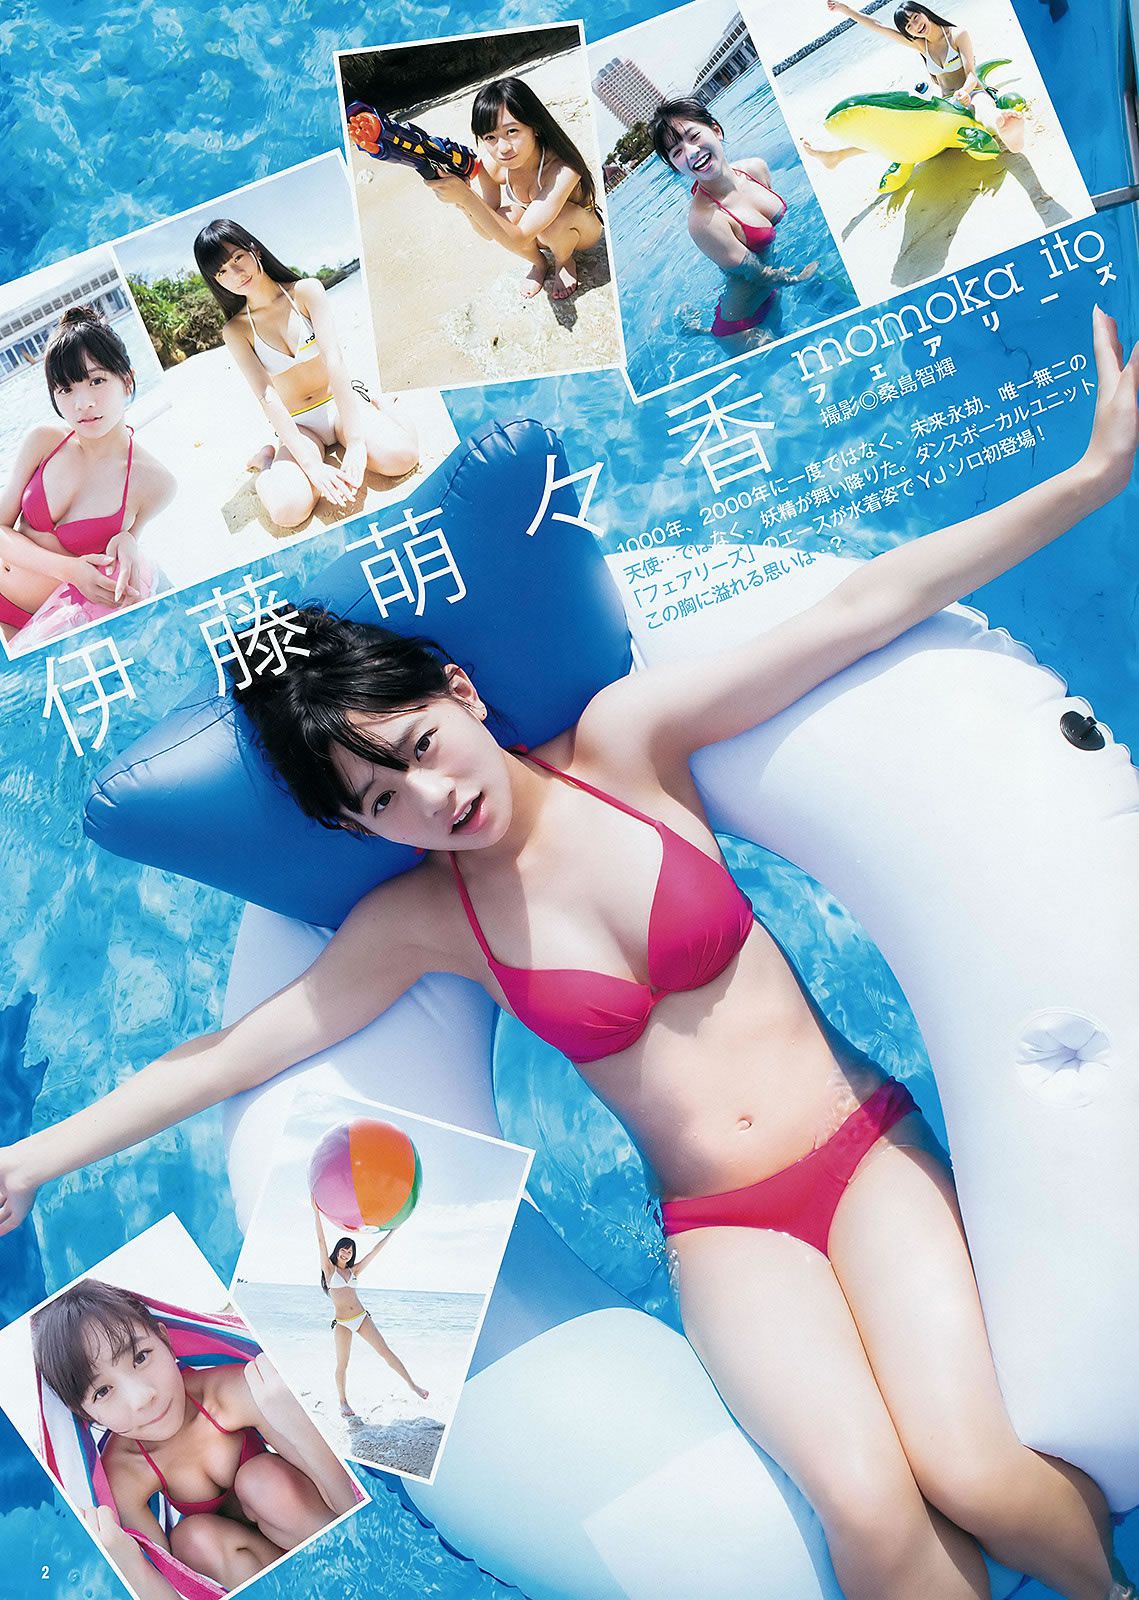 [Weekly Young Jump] 2015 No.44 45 伊藤萌々香 松井珠理奈 篠崎愛 内田理央  [24P]